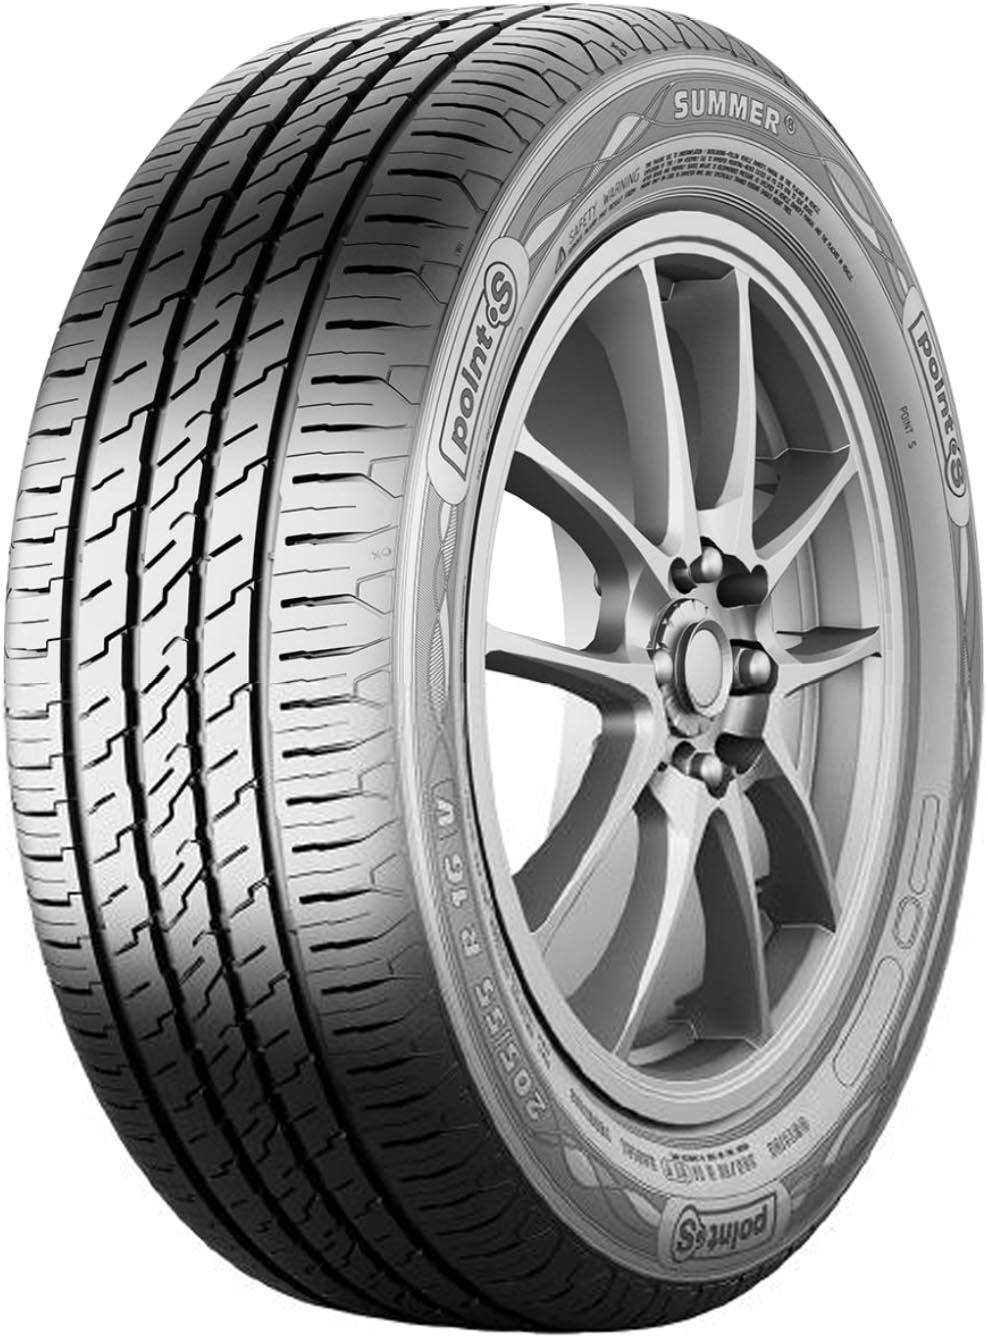 POINTS SUMMER S 185/65R14 86T